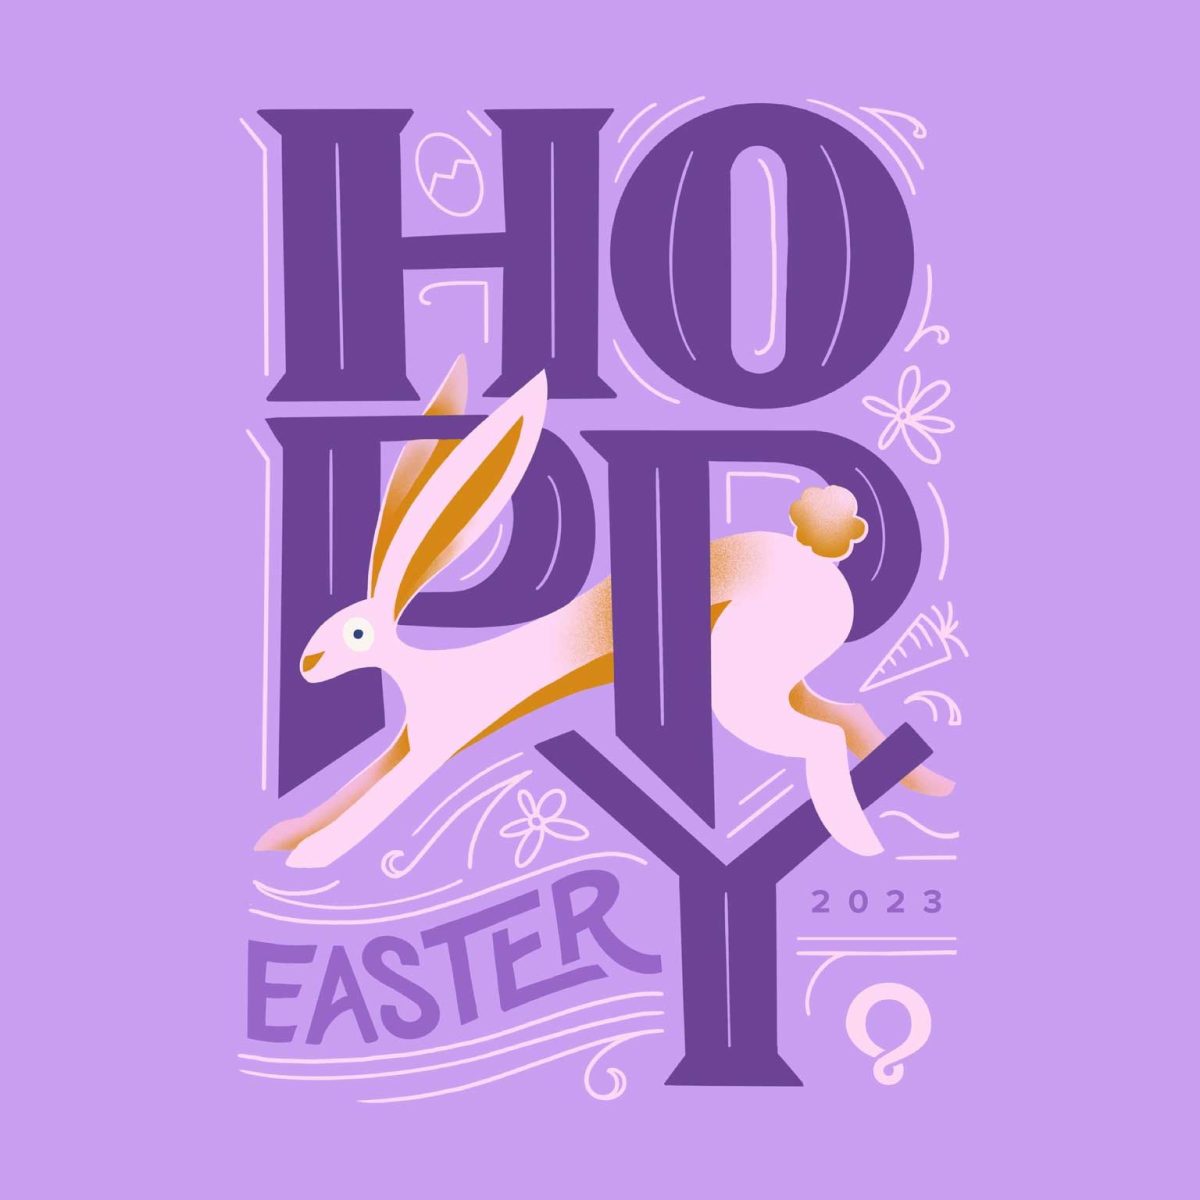 Hand illustrated text that reads "Hoppy Easter" with a rabbit intertwined with the two P's in Hoppy.